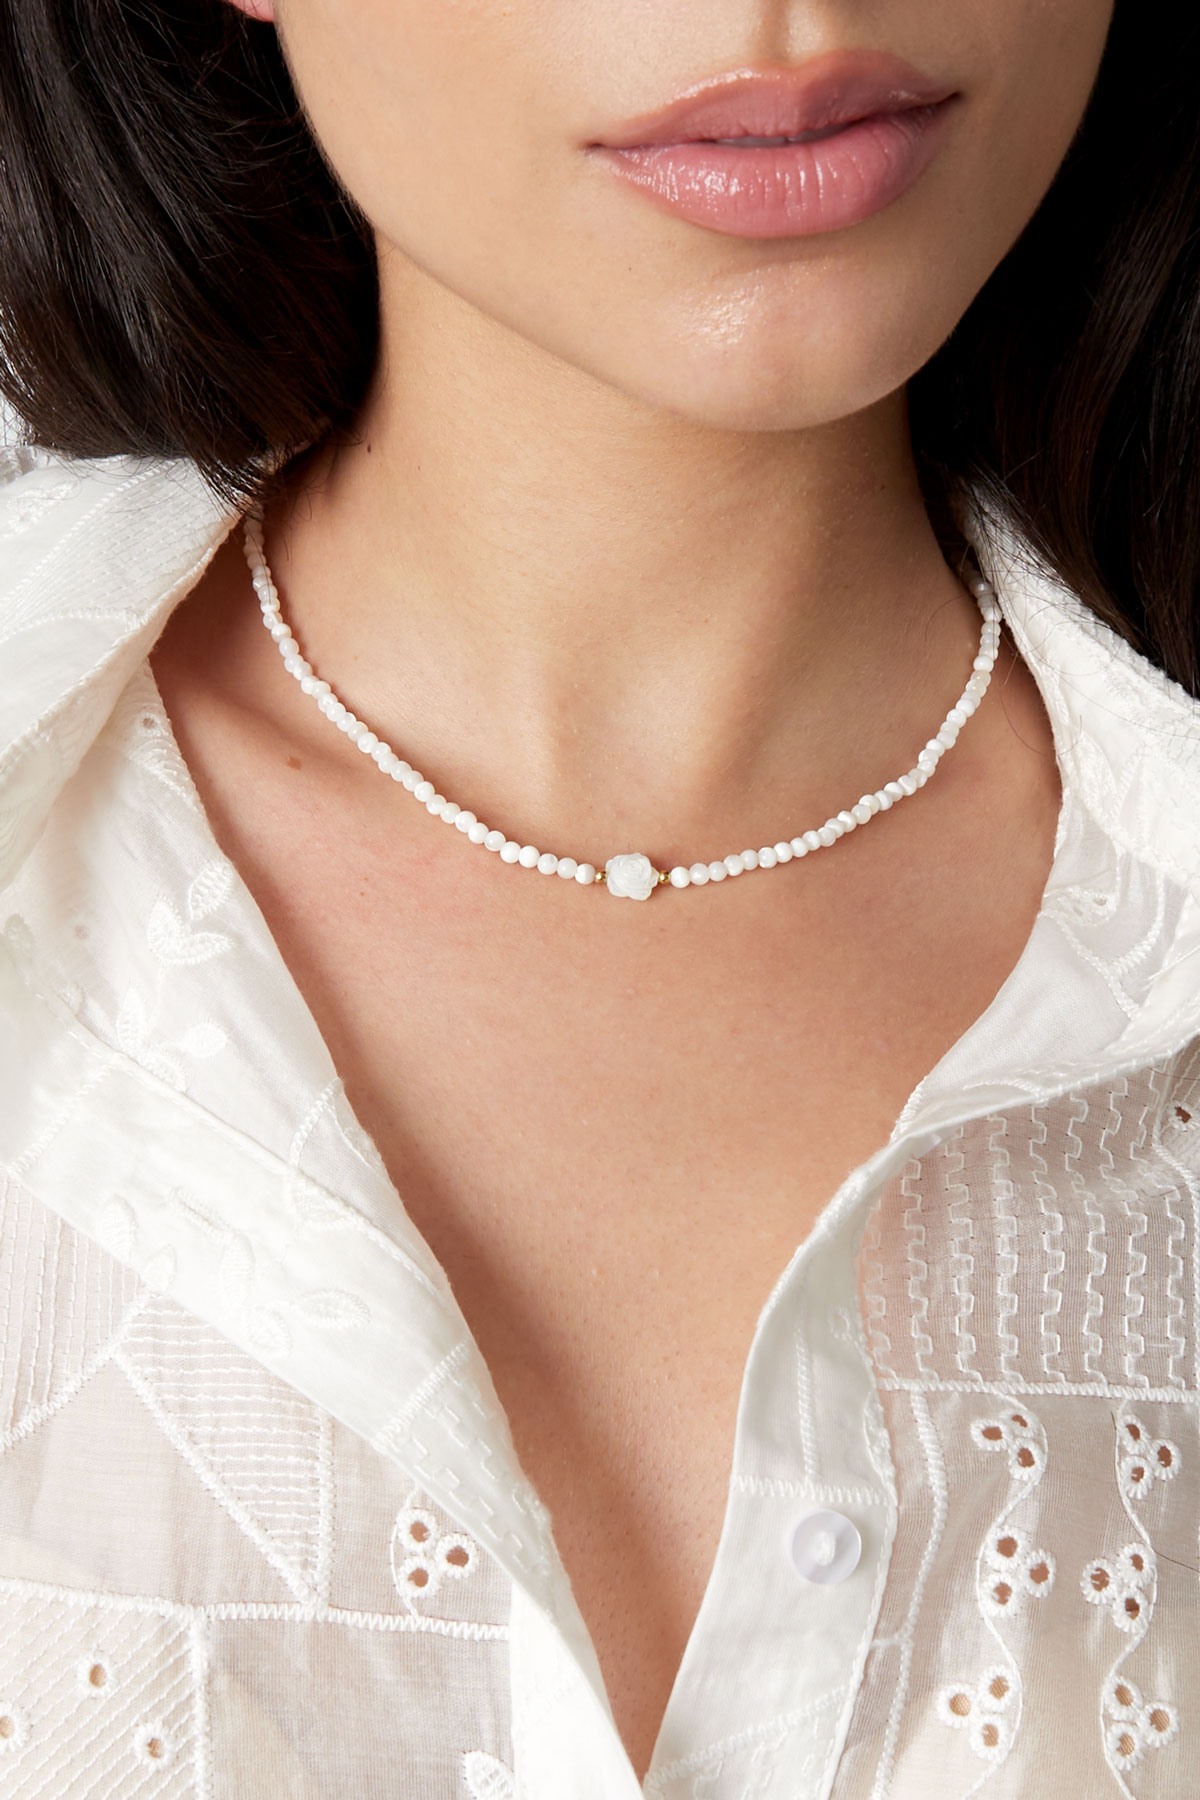 Collier perles blanches - blanc/or Image3